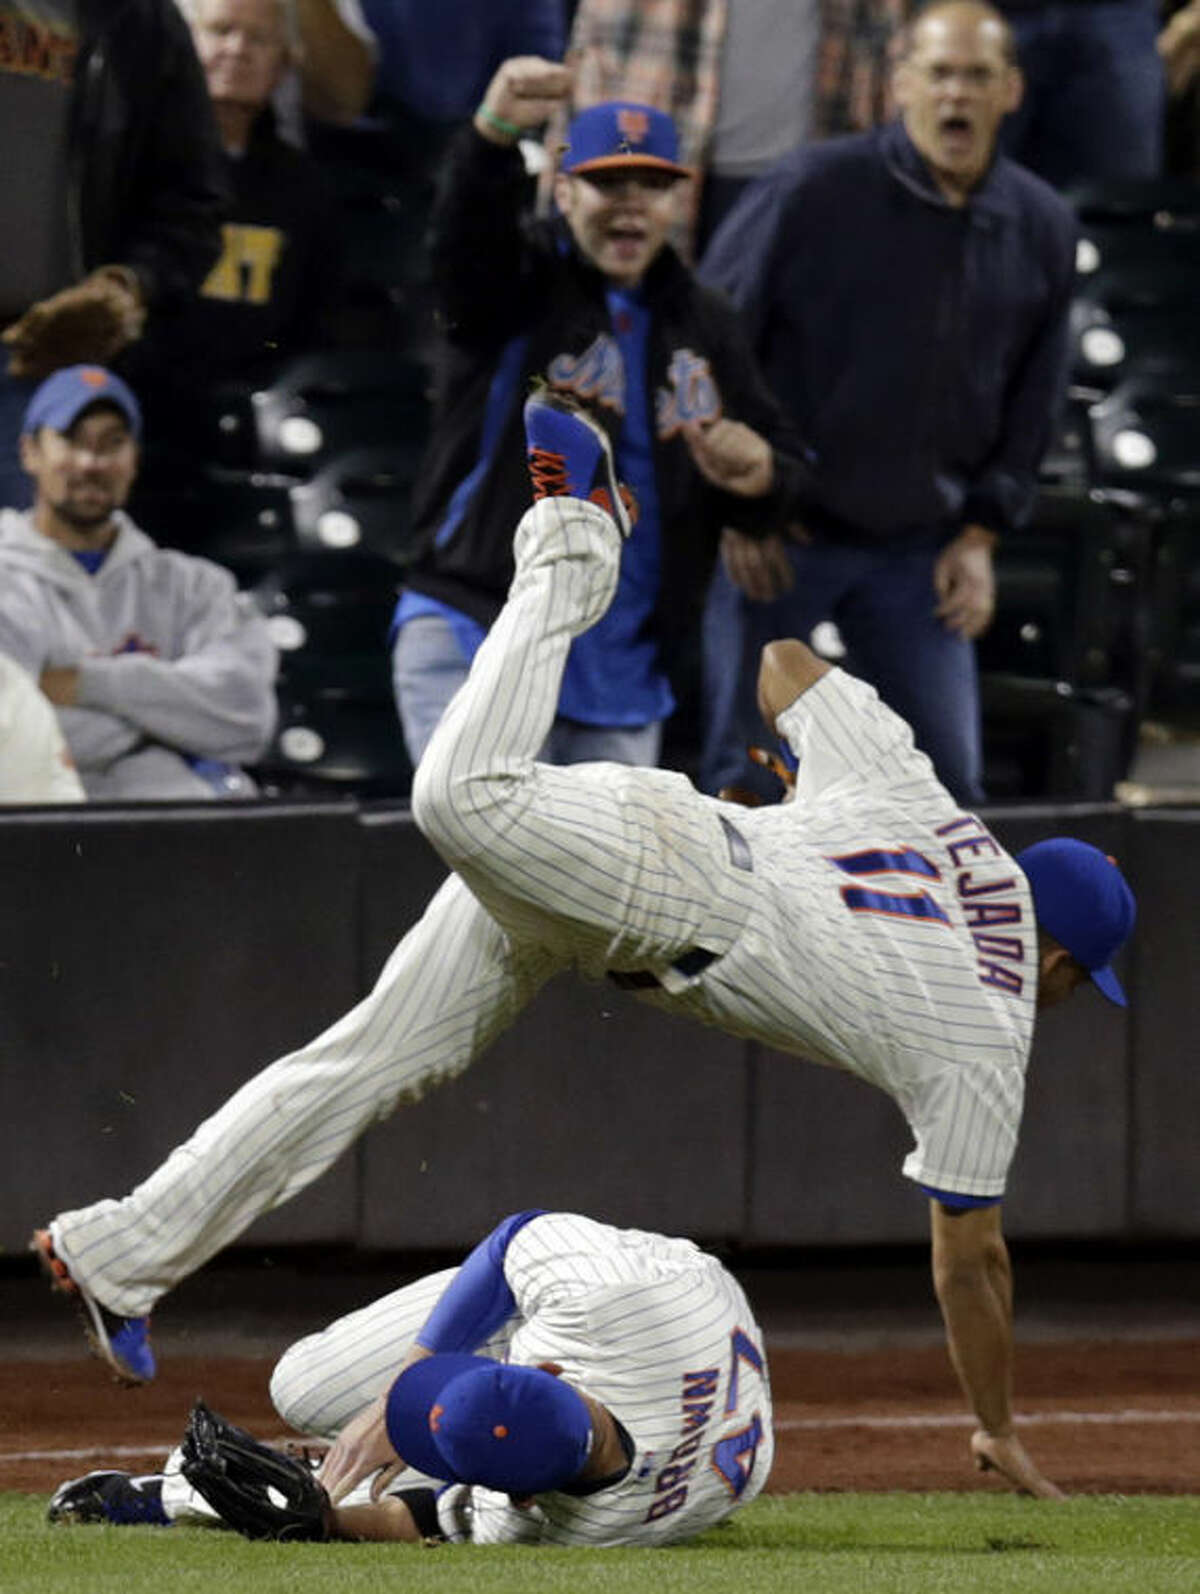 New York Mets shortstop Ruben Tejada (11) trips over left fielder Andrew Brown after catching San Francisco Giants' Angel Pagan's ninth-inning fly-out in left field during a baseball game on Wednesday, Sept. 18, 2013, in New York. (AP Photo/Kathy Willens)